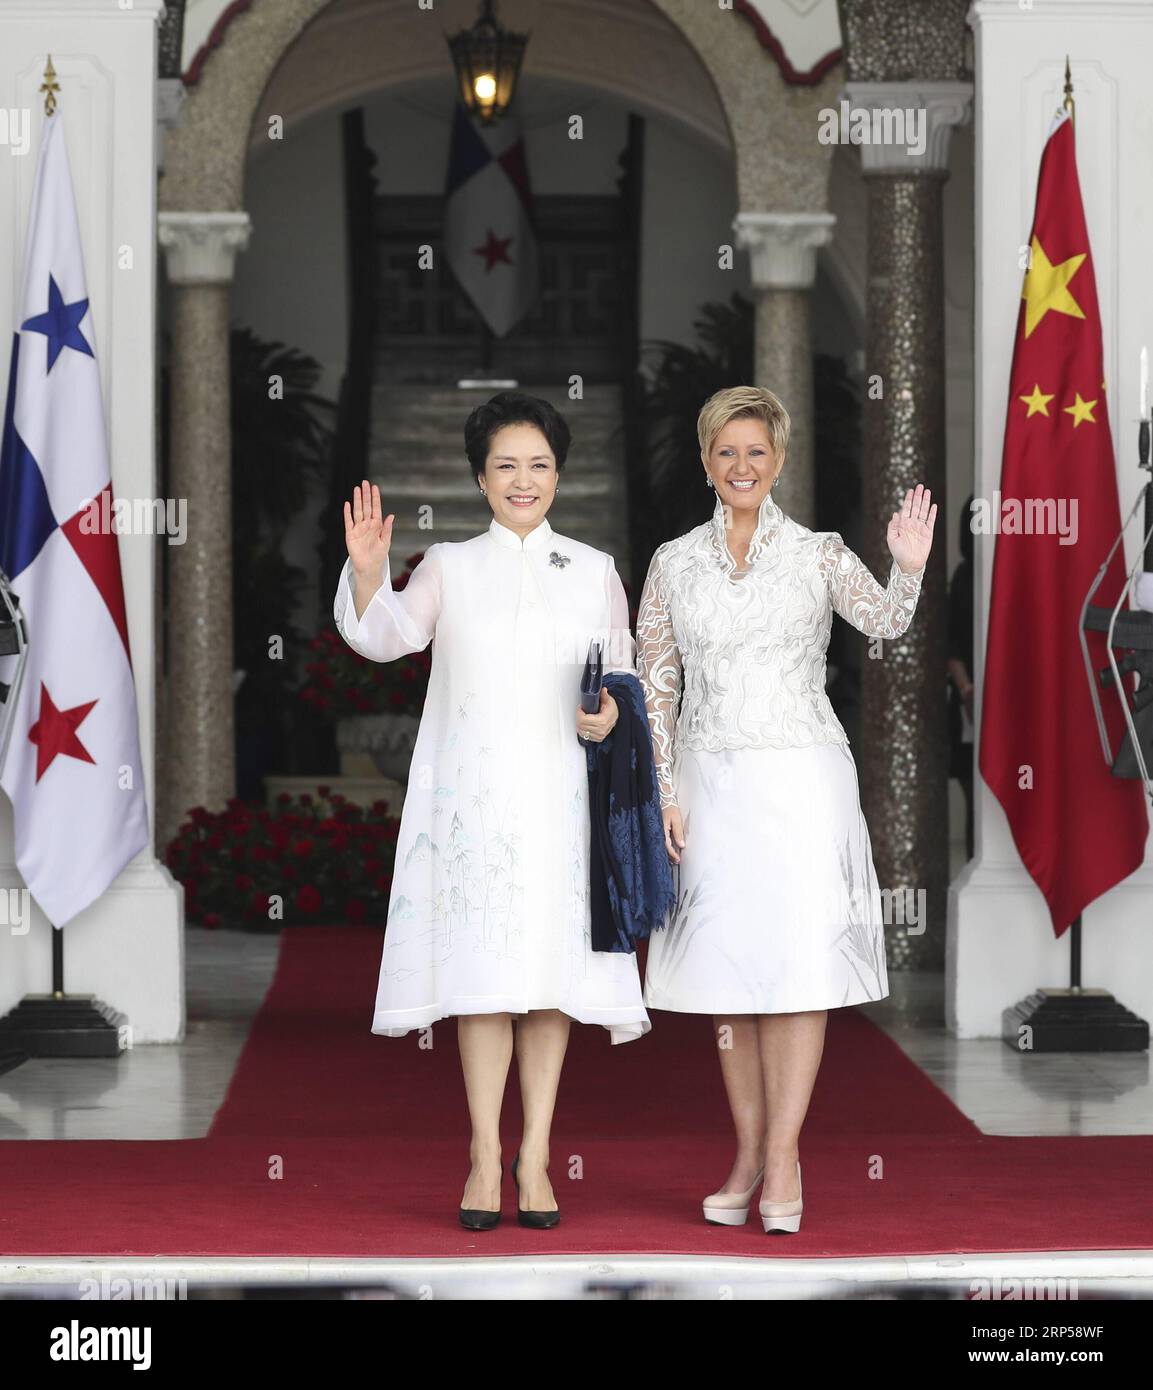 (181203) -- PANAMA CITY, Dec. 3, 2018 -- Peng Liyuan (L), wife of Chinese President Xi Jinping, and World Health Organization goodwill ambassador for tuberculosis and HIV/AIDS and UNESCO special envoy for the advancement of girls and women s education, meets with Panamanian First Lady Lorena Castillo Garcia, a special ambassador for UNAIDS in Latin America, in Panama City, Panama, Dec. 3, 2018. Peng and Castillo jointly attended a publicizing activity on AIDS prevention and treatment on Monday. ) (zwx) PANAMA-CHINA-PRESIDENTS WIVES-AIDS PREVENTION DingxHaitao PUBLICATIONxNOTxINxCHN Stock Photo